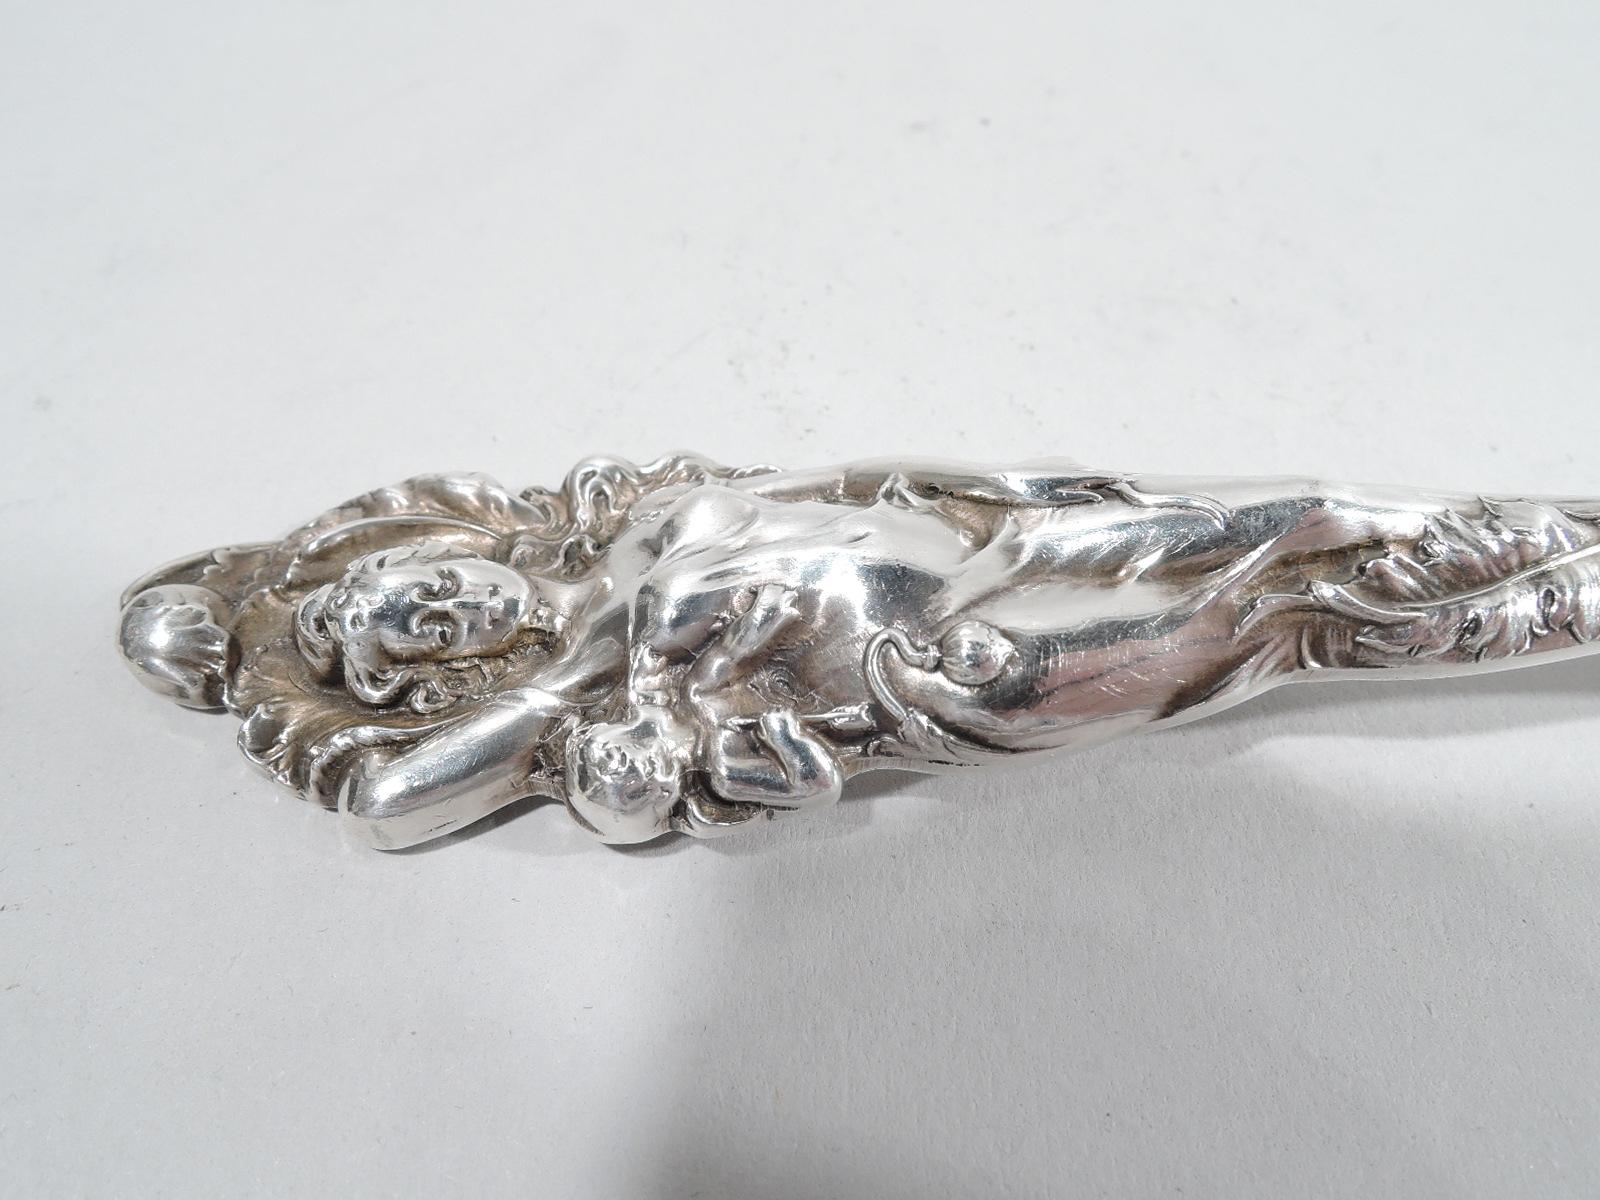 Love disarmed sterling silver tomato server. Made by Reed & Barton in Taunton, Mass, ca 1920. Round shaped blade with ornamental piercing. Handle in form of voluptuous maiden in clingy drapery with Cupid peeking out from behind. A nice piece in the